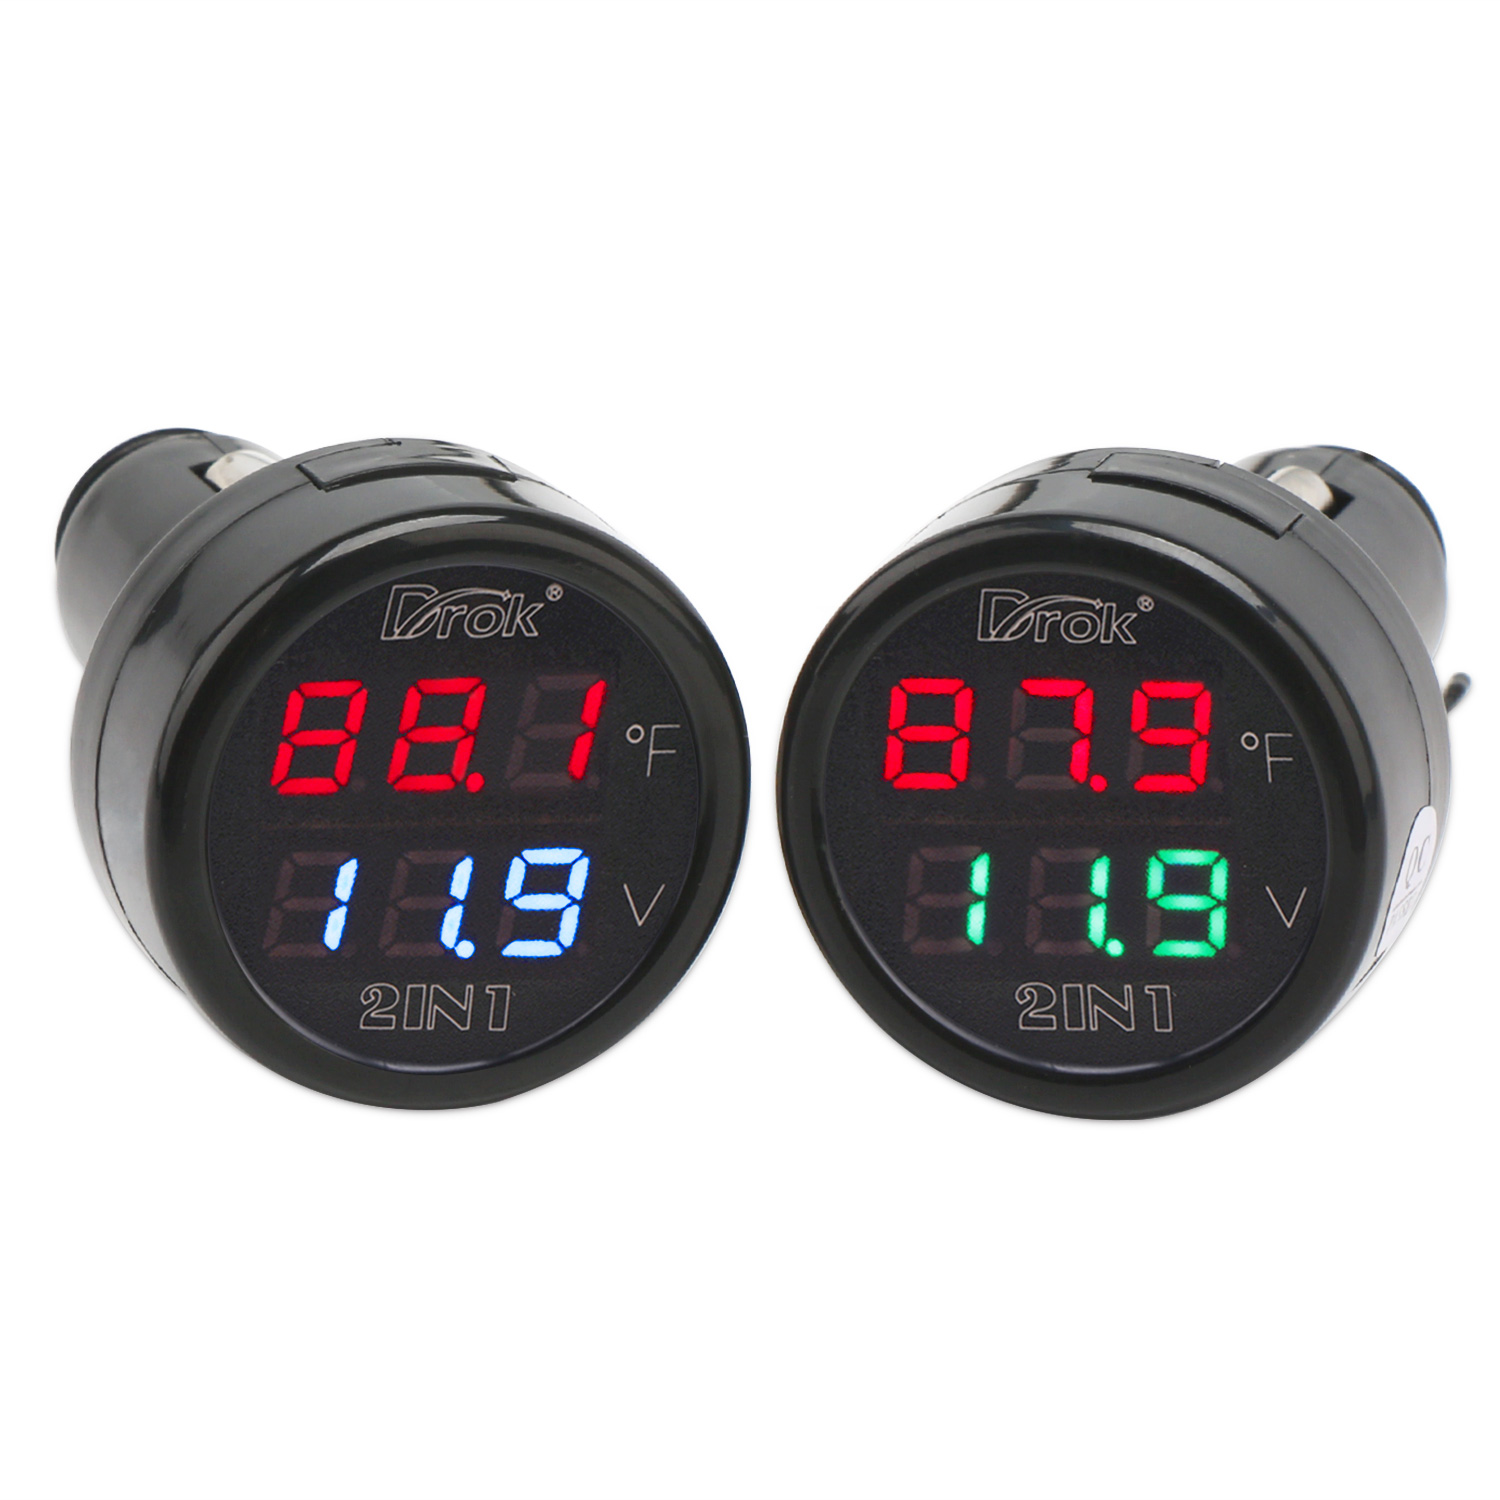 FOLCONROAD Ultra-Thin Car Onboard Electronic Clock Voltmeter Voltage Meter Thermometer Temperature Meter 